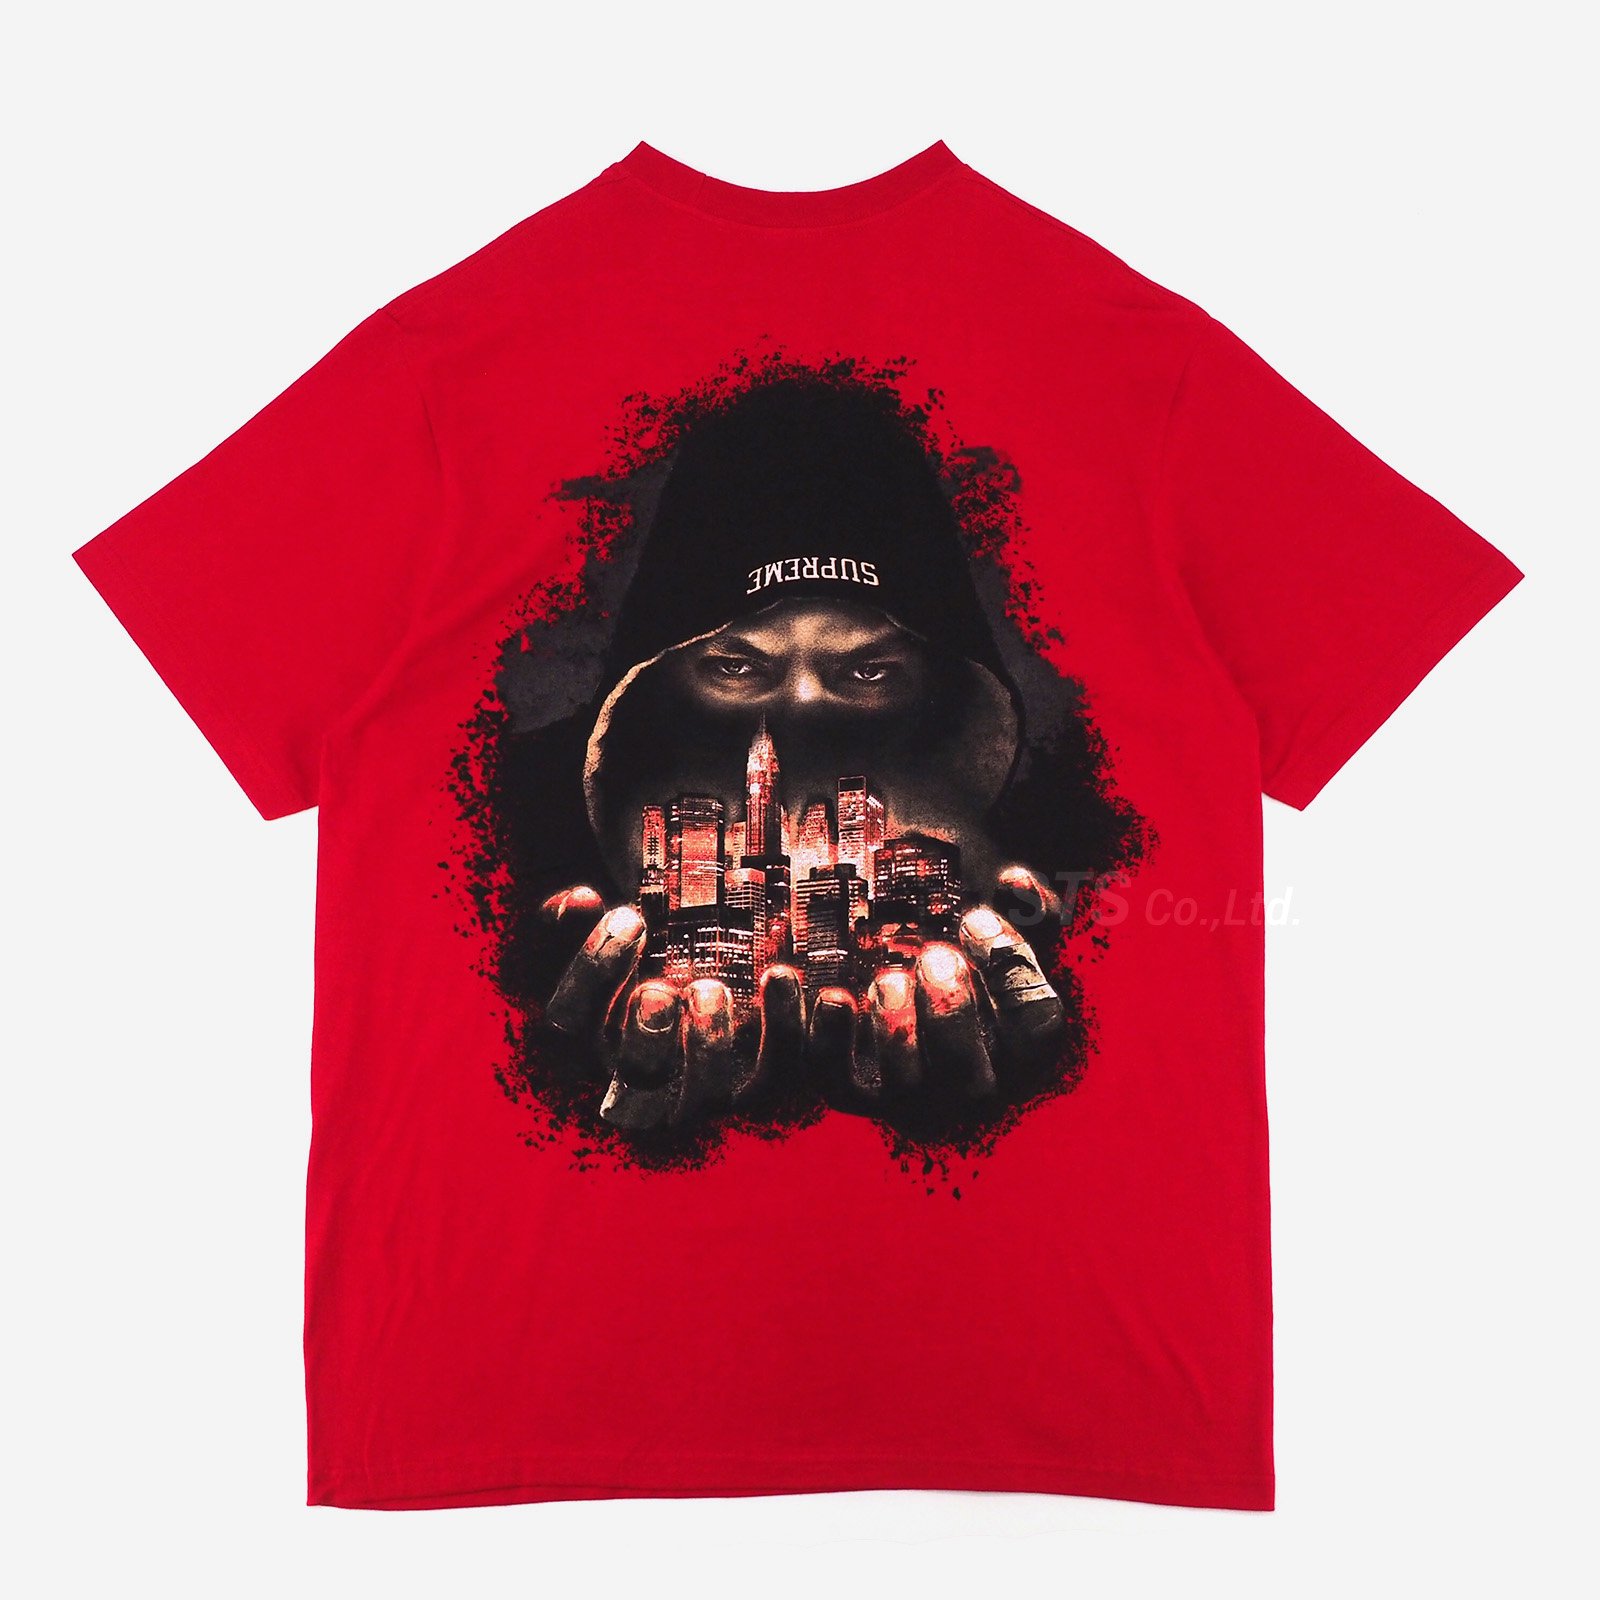 Supreme Fighter Tee Charcoalカラー